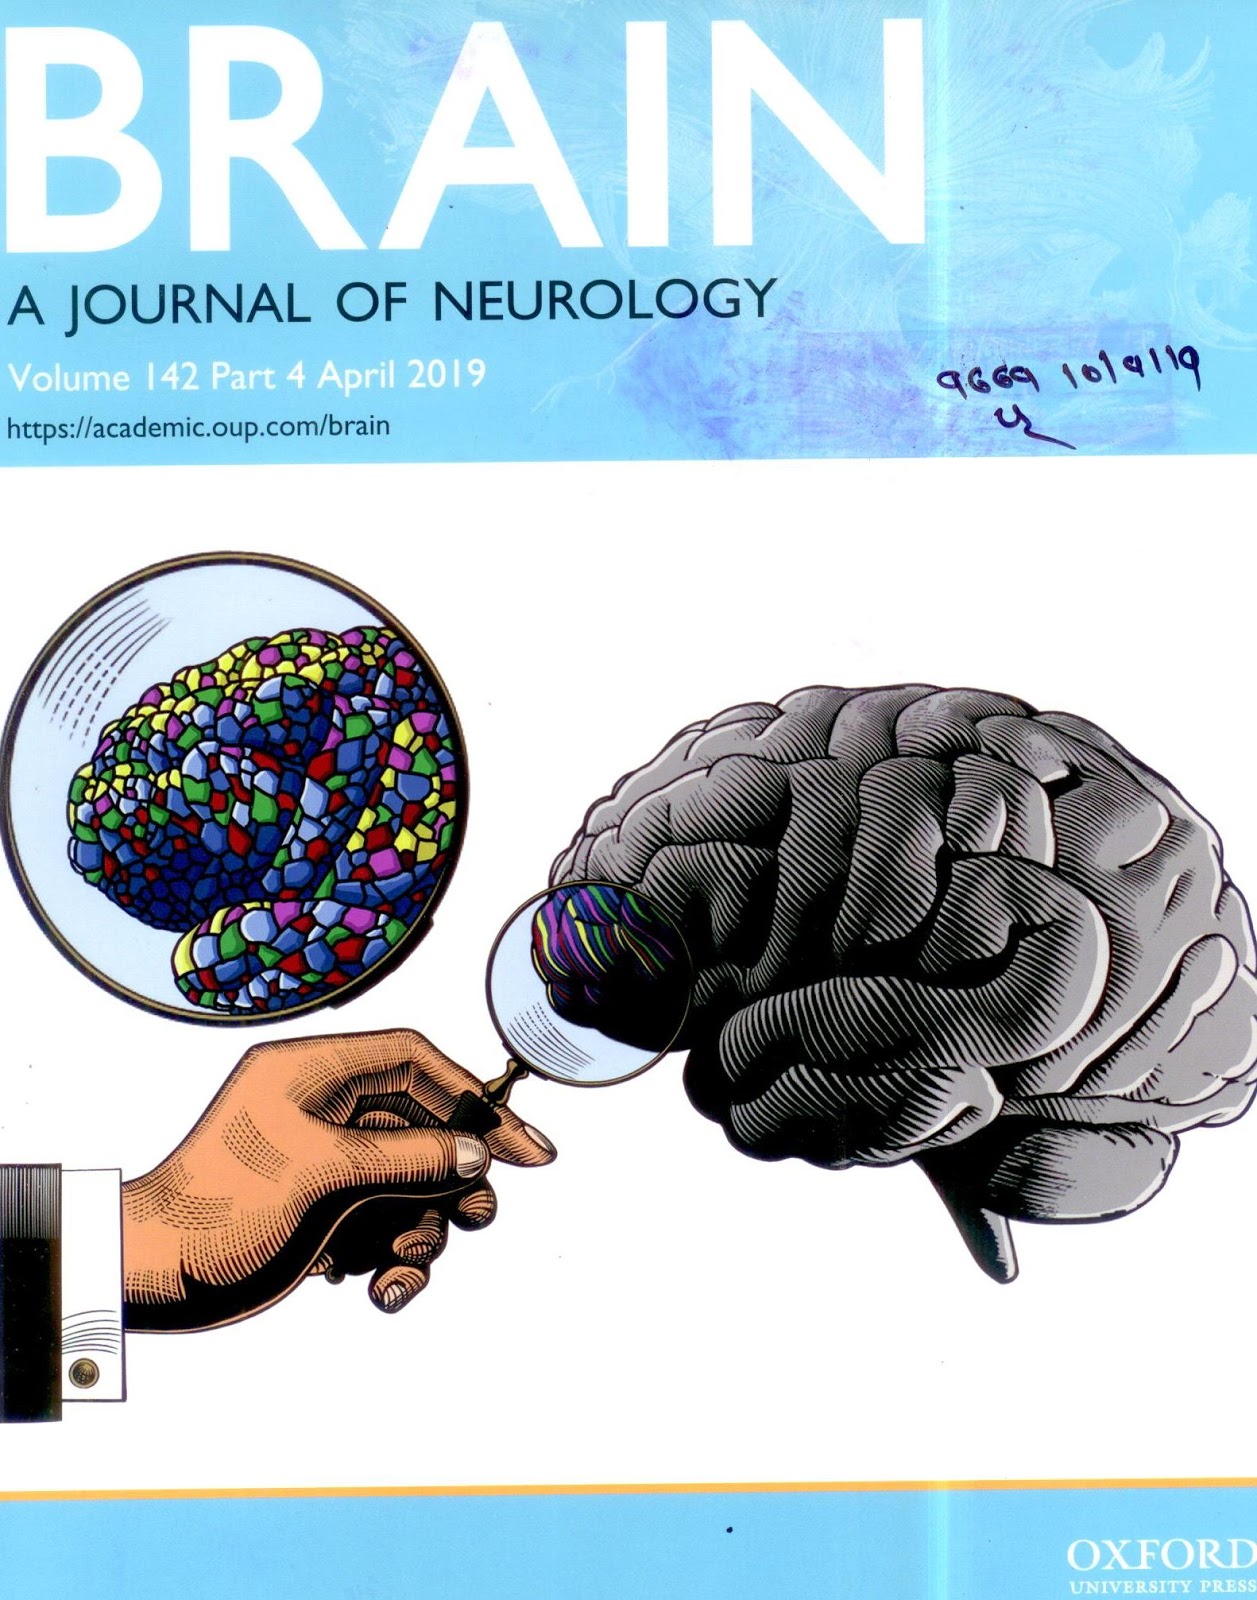 https://academic.oup.com/brain/issue/142/4